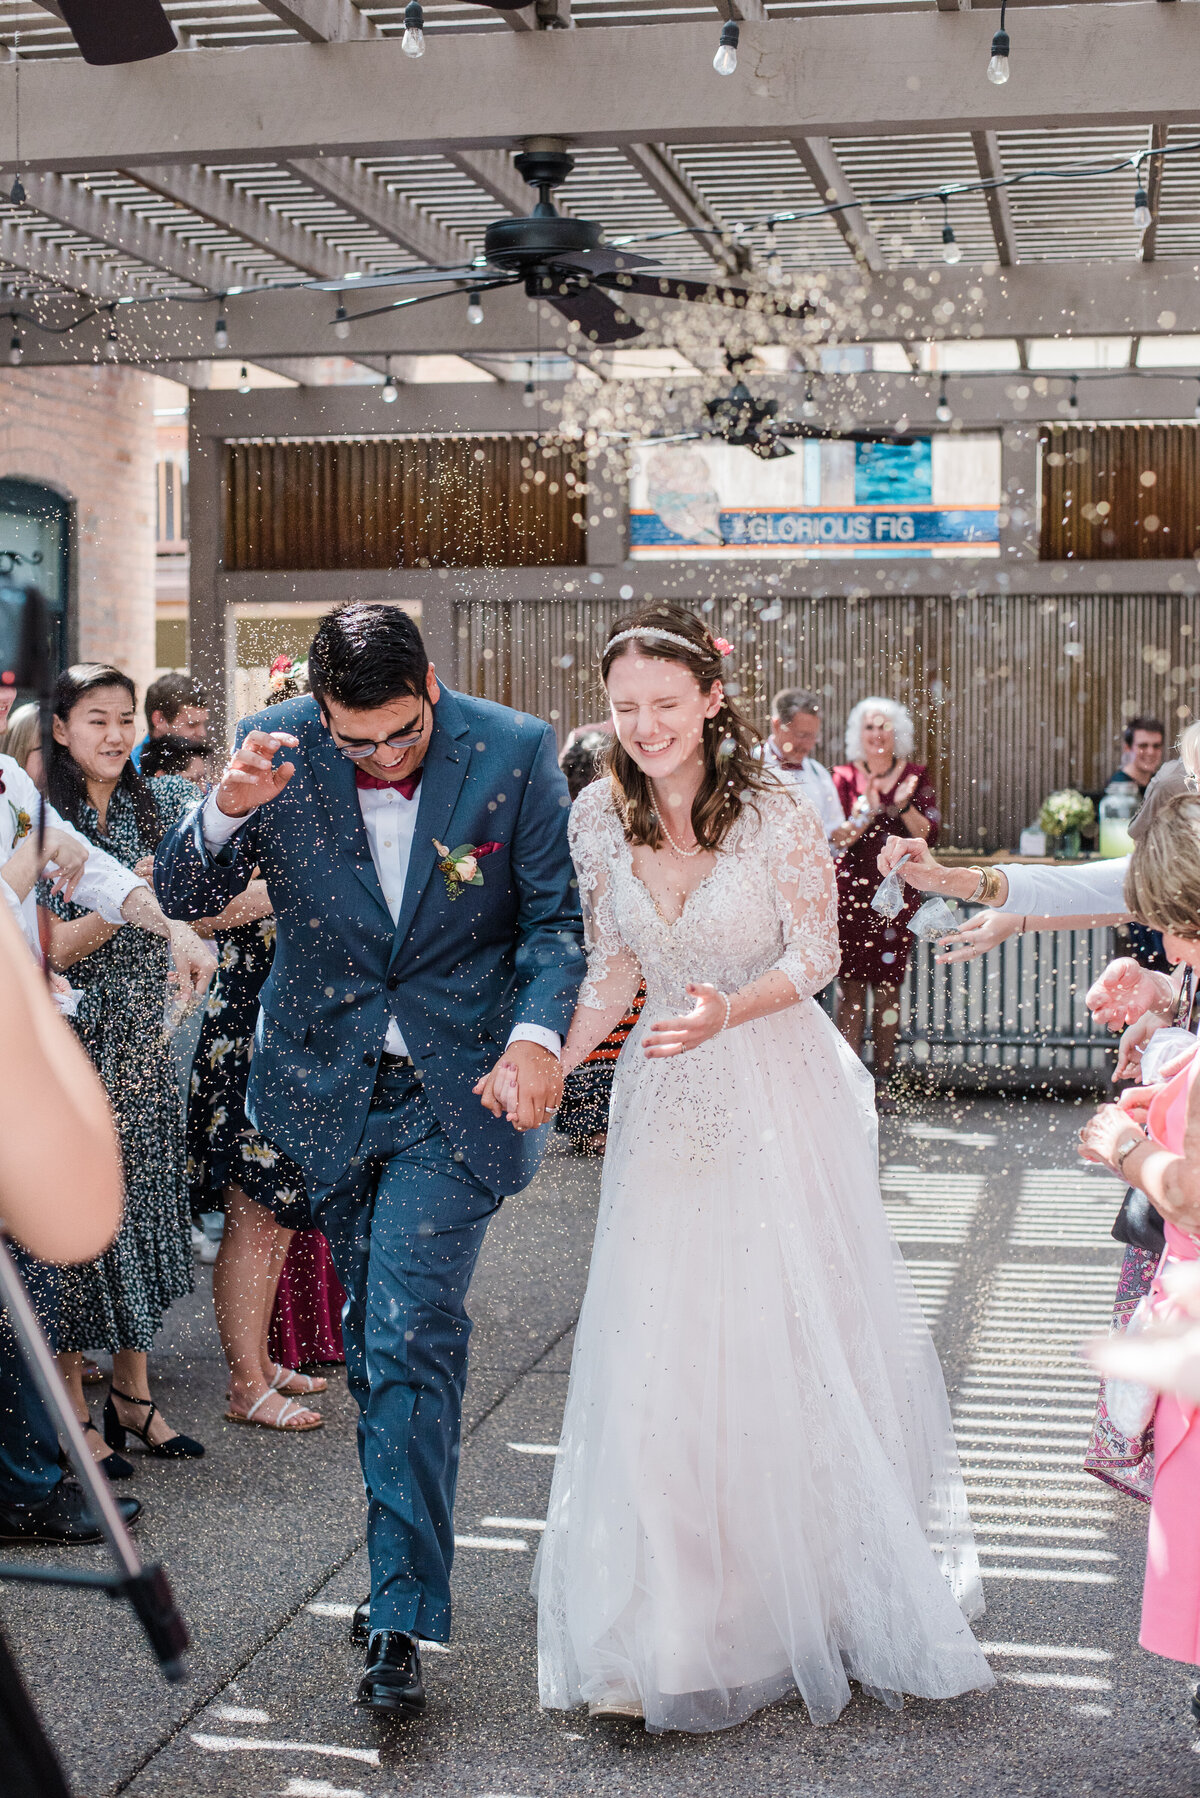 wedding exit with rice being thrown at the bride and groom as they rung from their reception while holding hands captured by denver wedding photographer